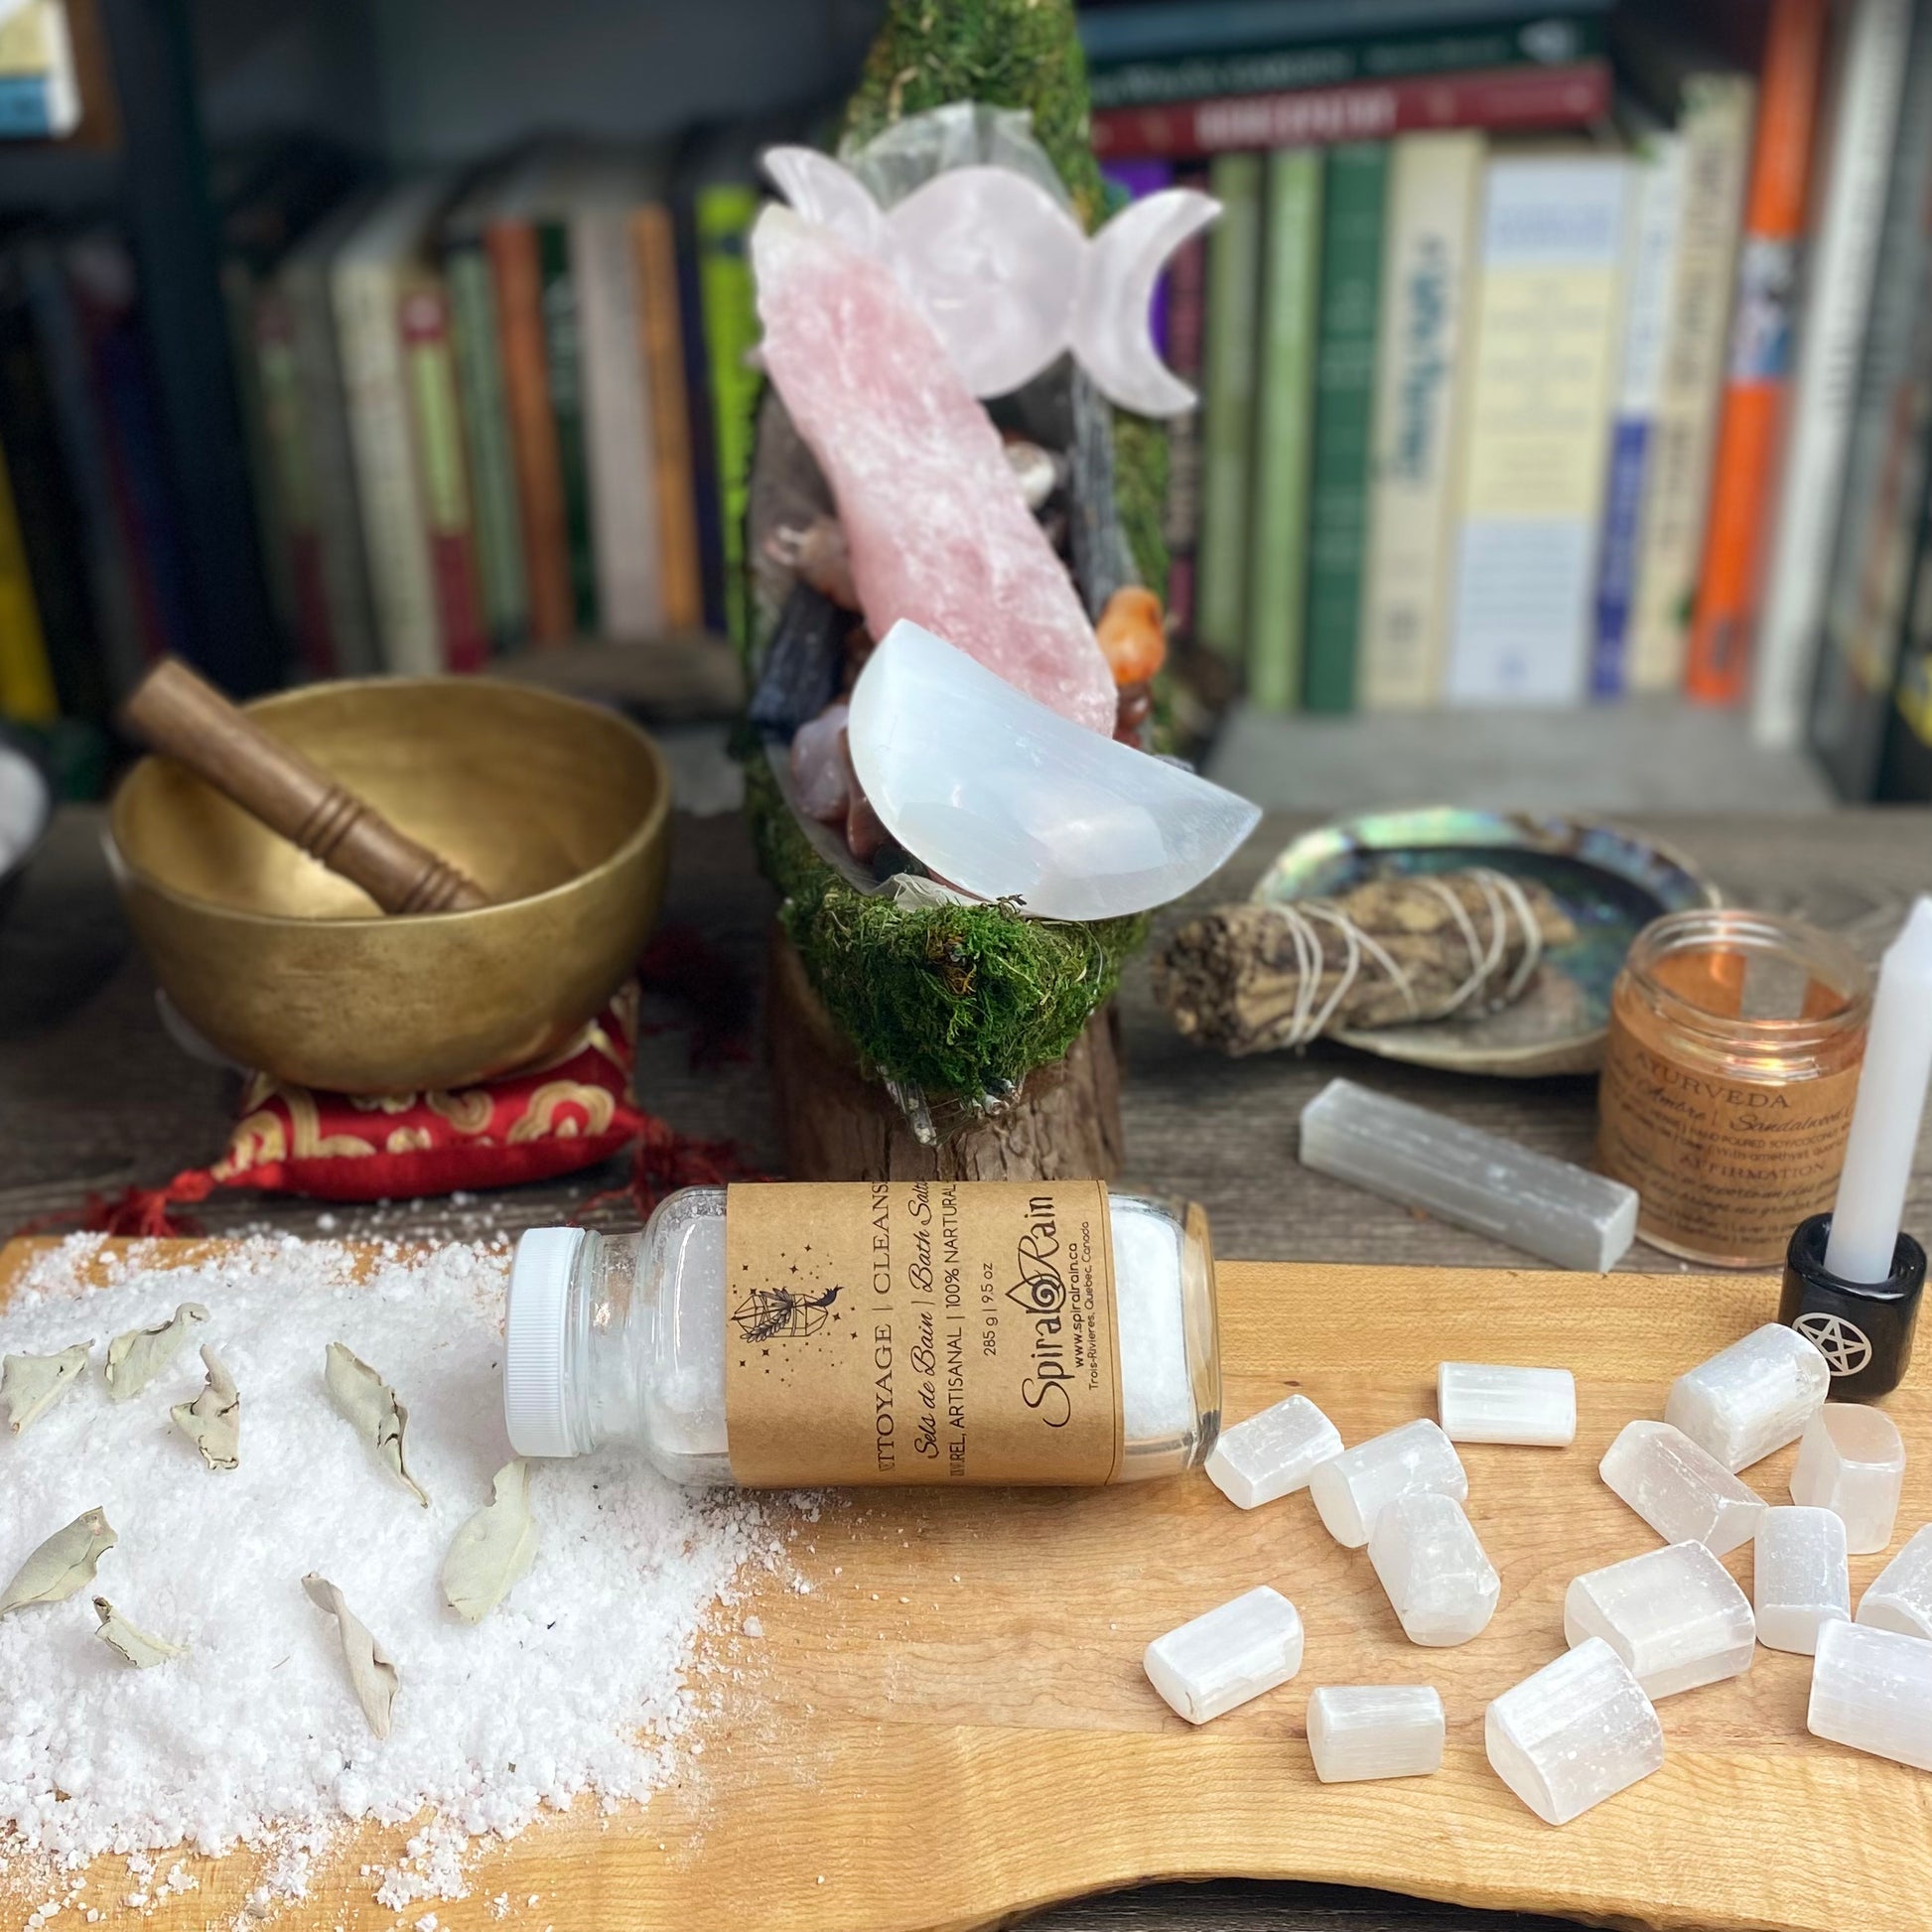 Cleansing bath salts at $20 only from Spiral Rain